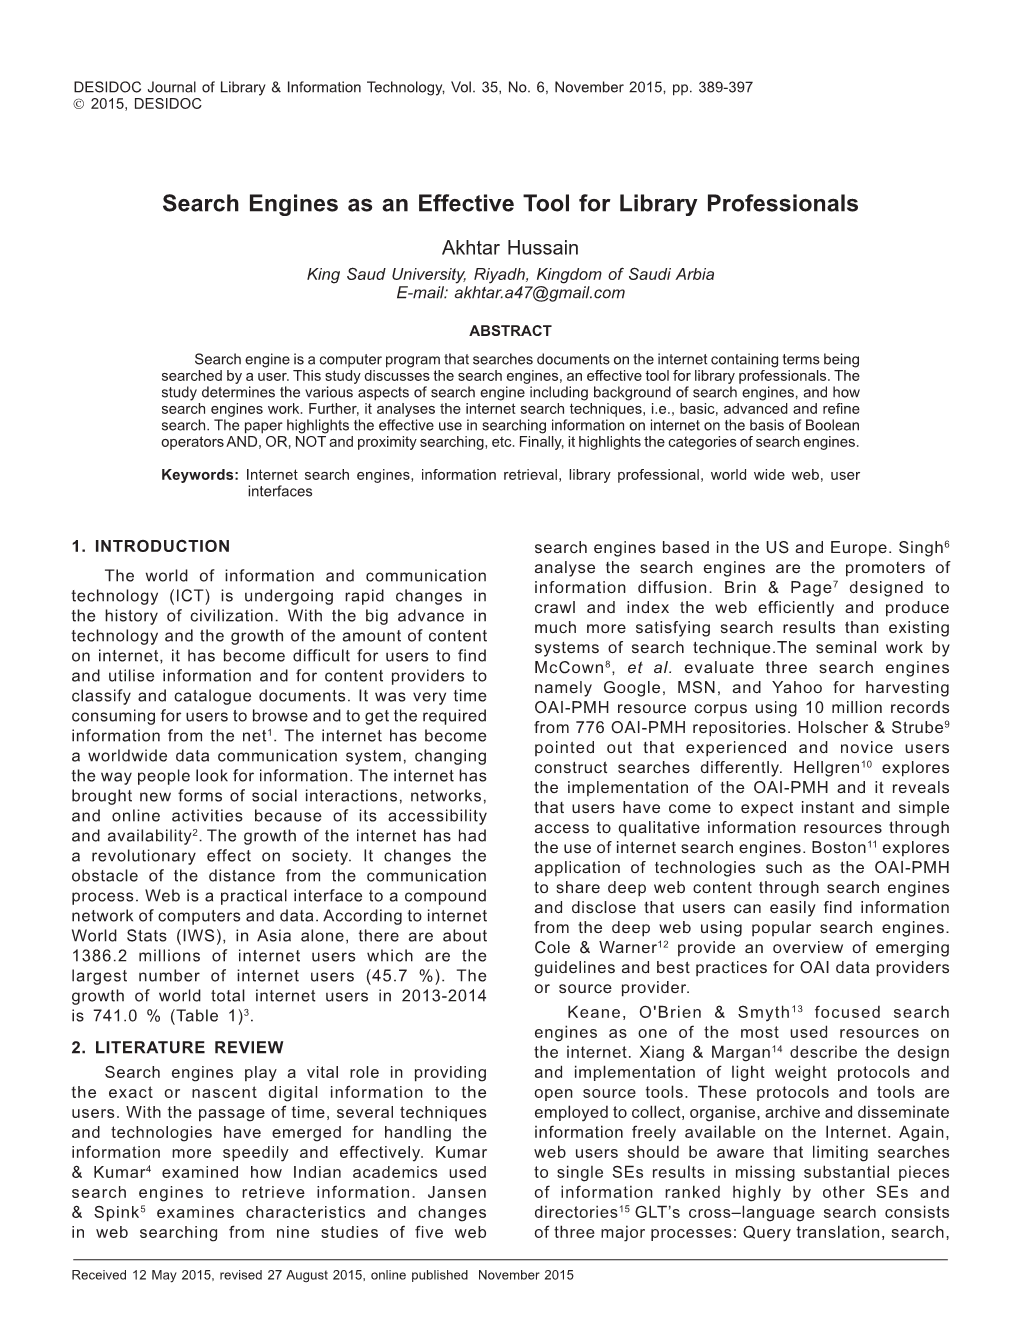 Search Engines As an Effective Tool for Library Professionals